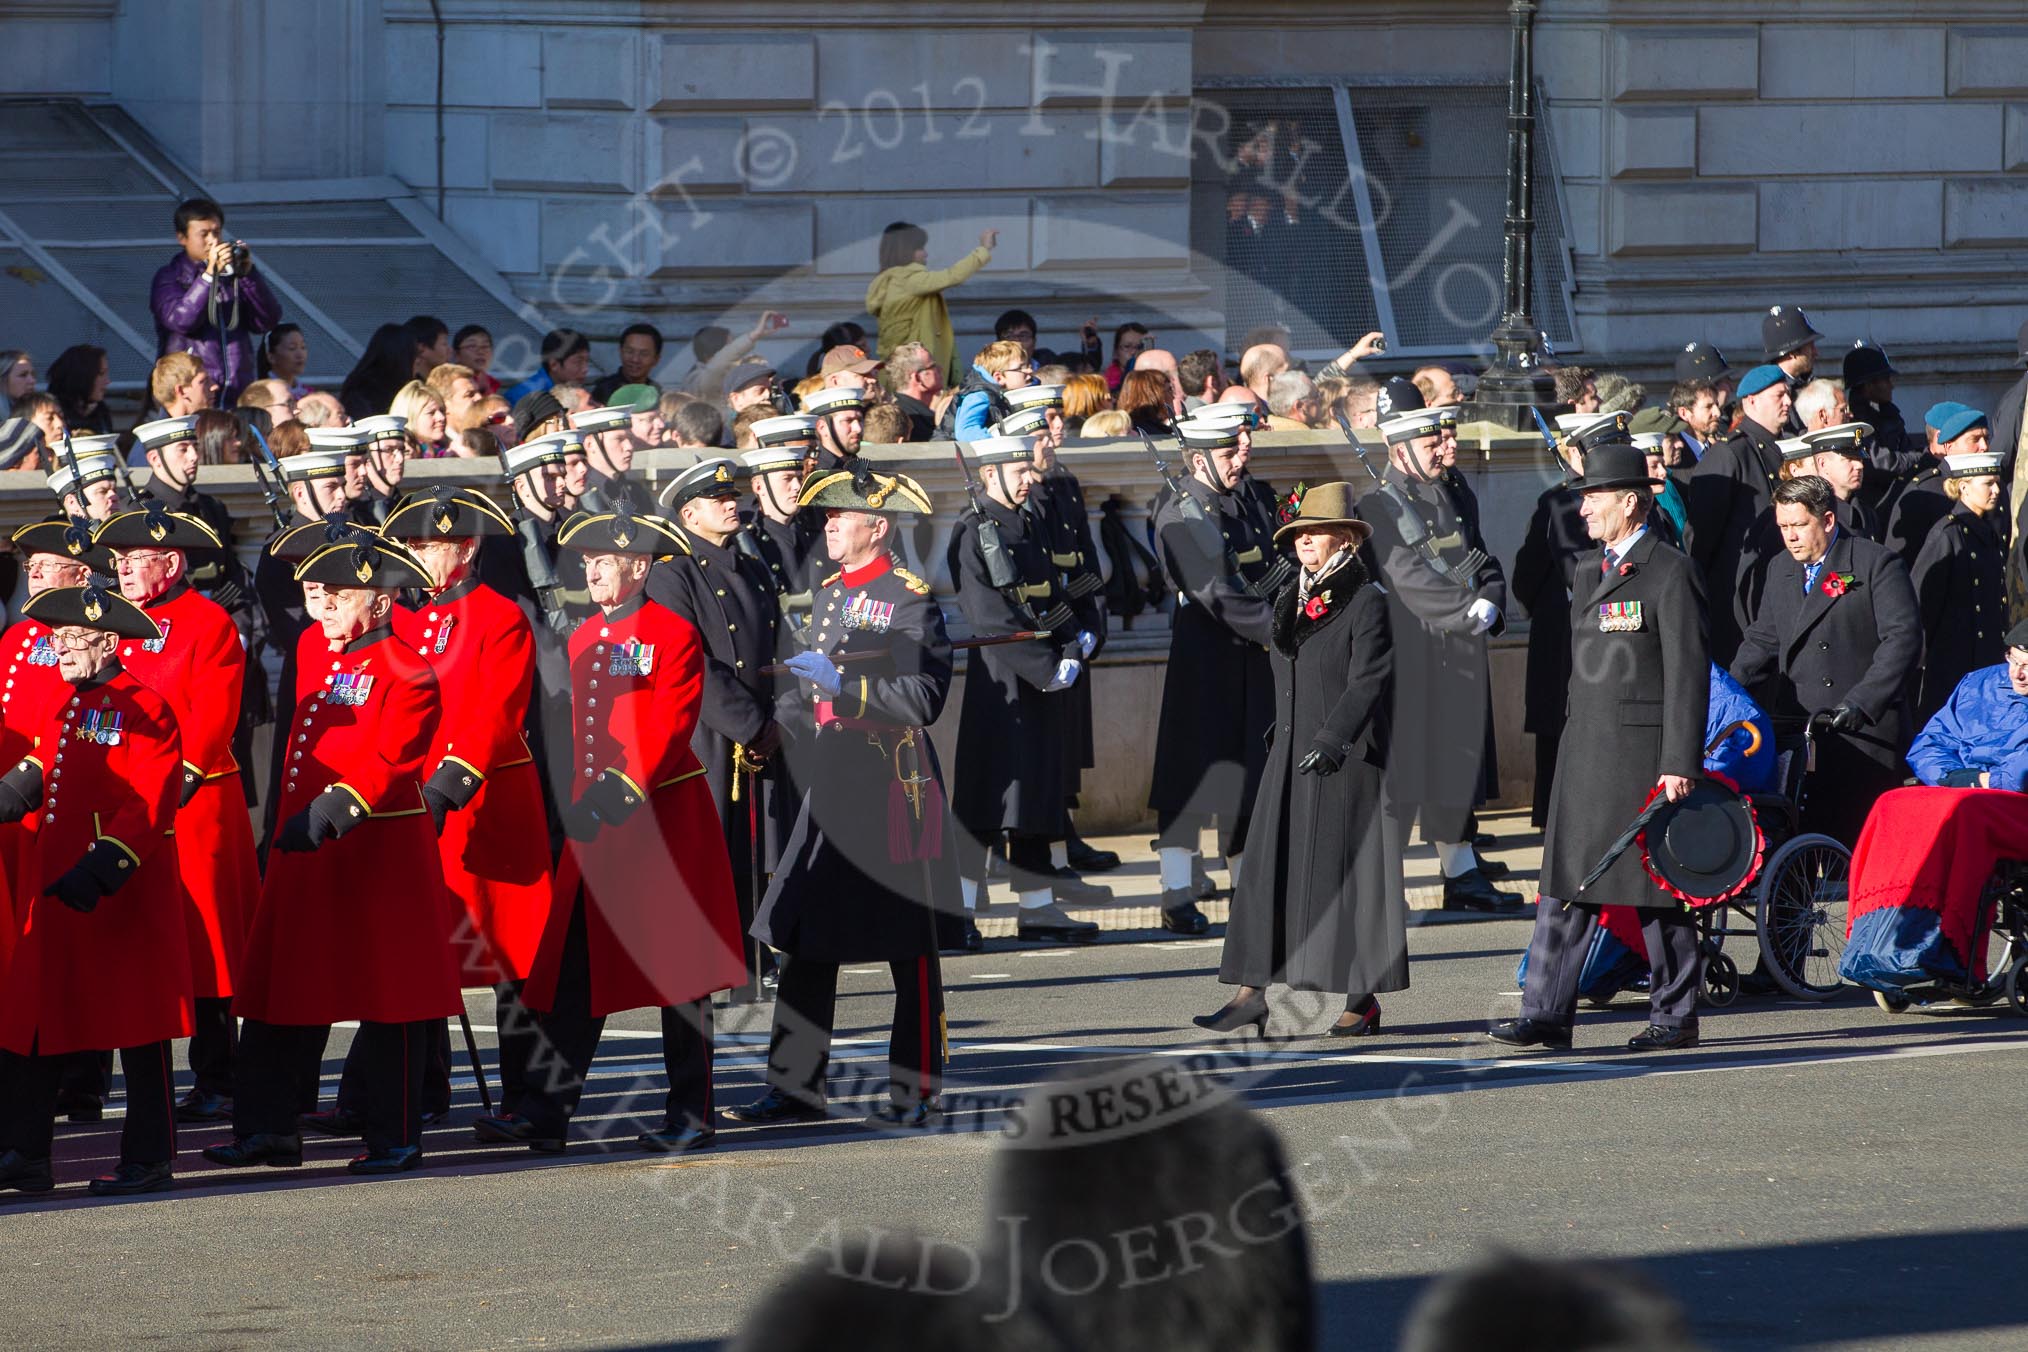 Remembrance Sunday 2012 Cenotaph March Past: Group E43 - Royal Hospital, Chelsea (Chelsea Pensioners) and E44 - Queen Alexandra's Hospital Home for Disabled Ex-Servicemen & Women..
Whitehall, Cenotaph,
London SW1,

United Kingdom,
on 11 November 2012 at 11:44, image #346